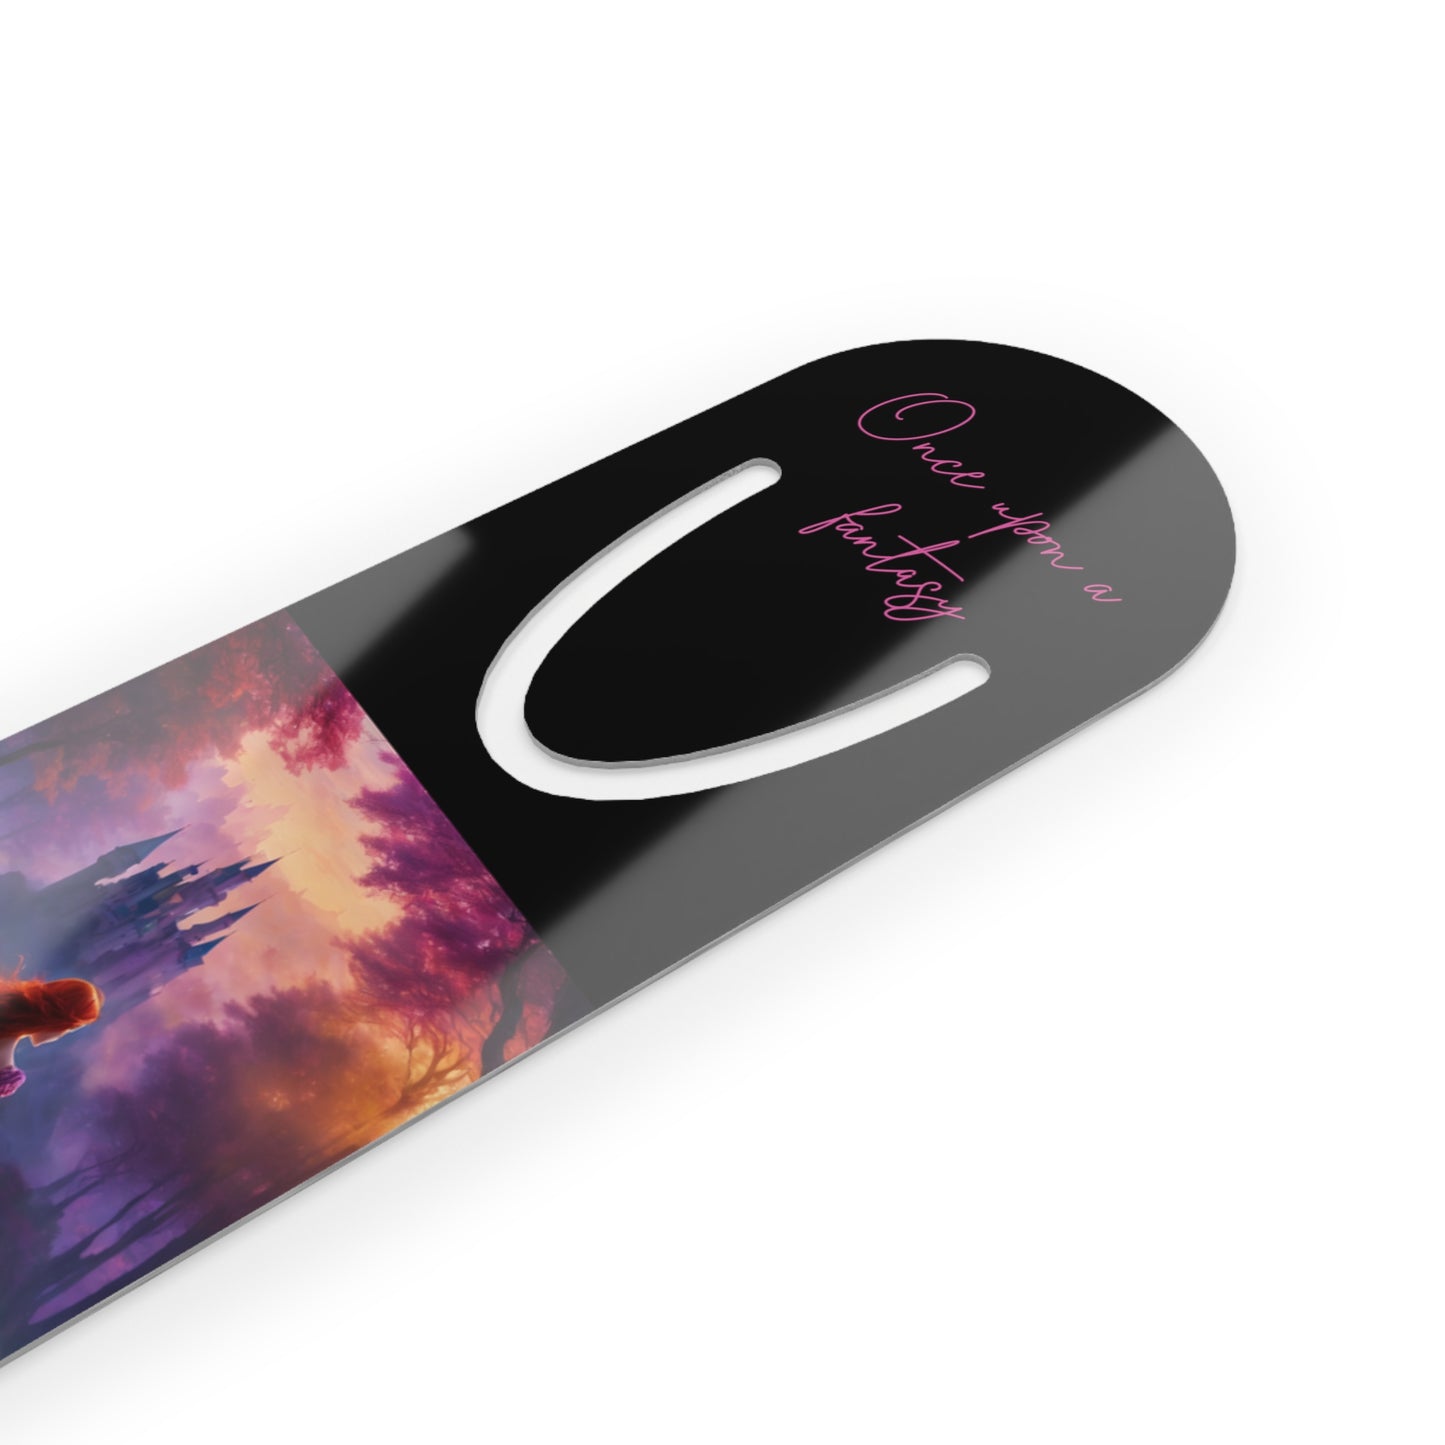 Once Upon A Fantasy Bookmark